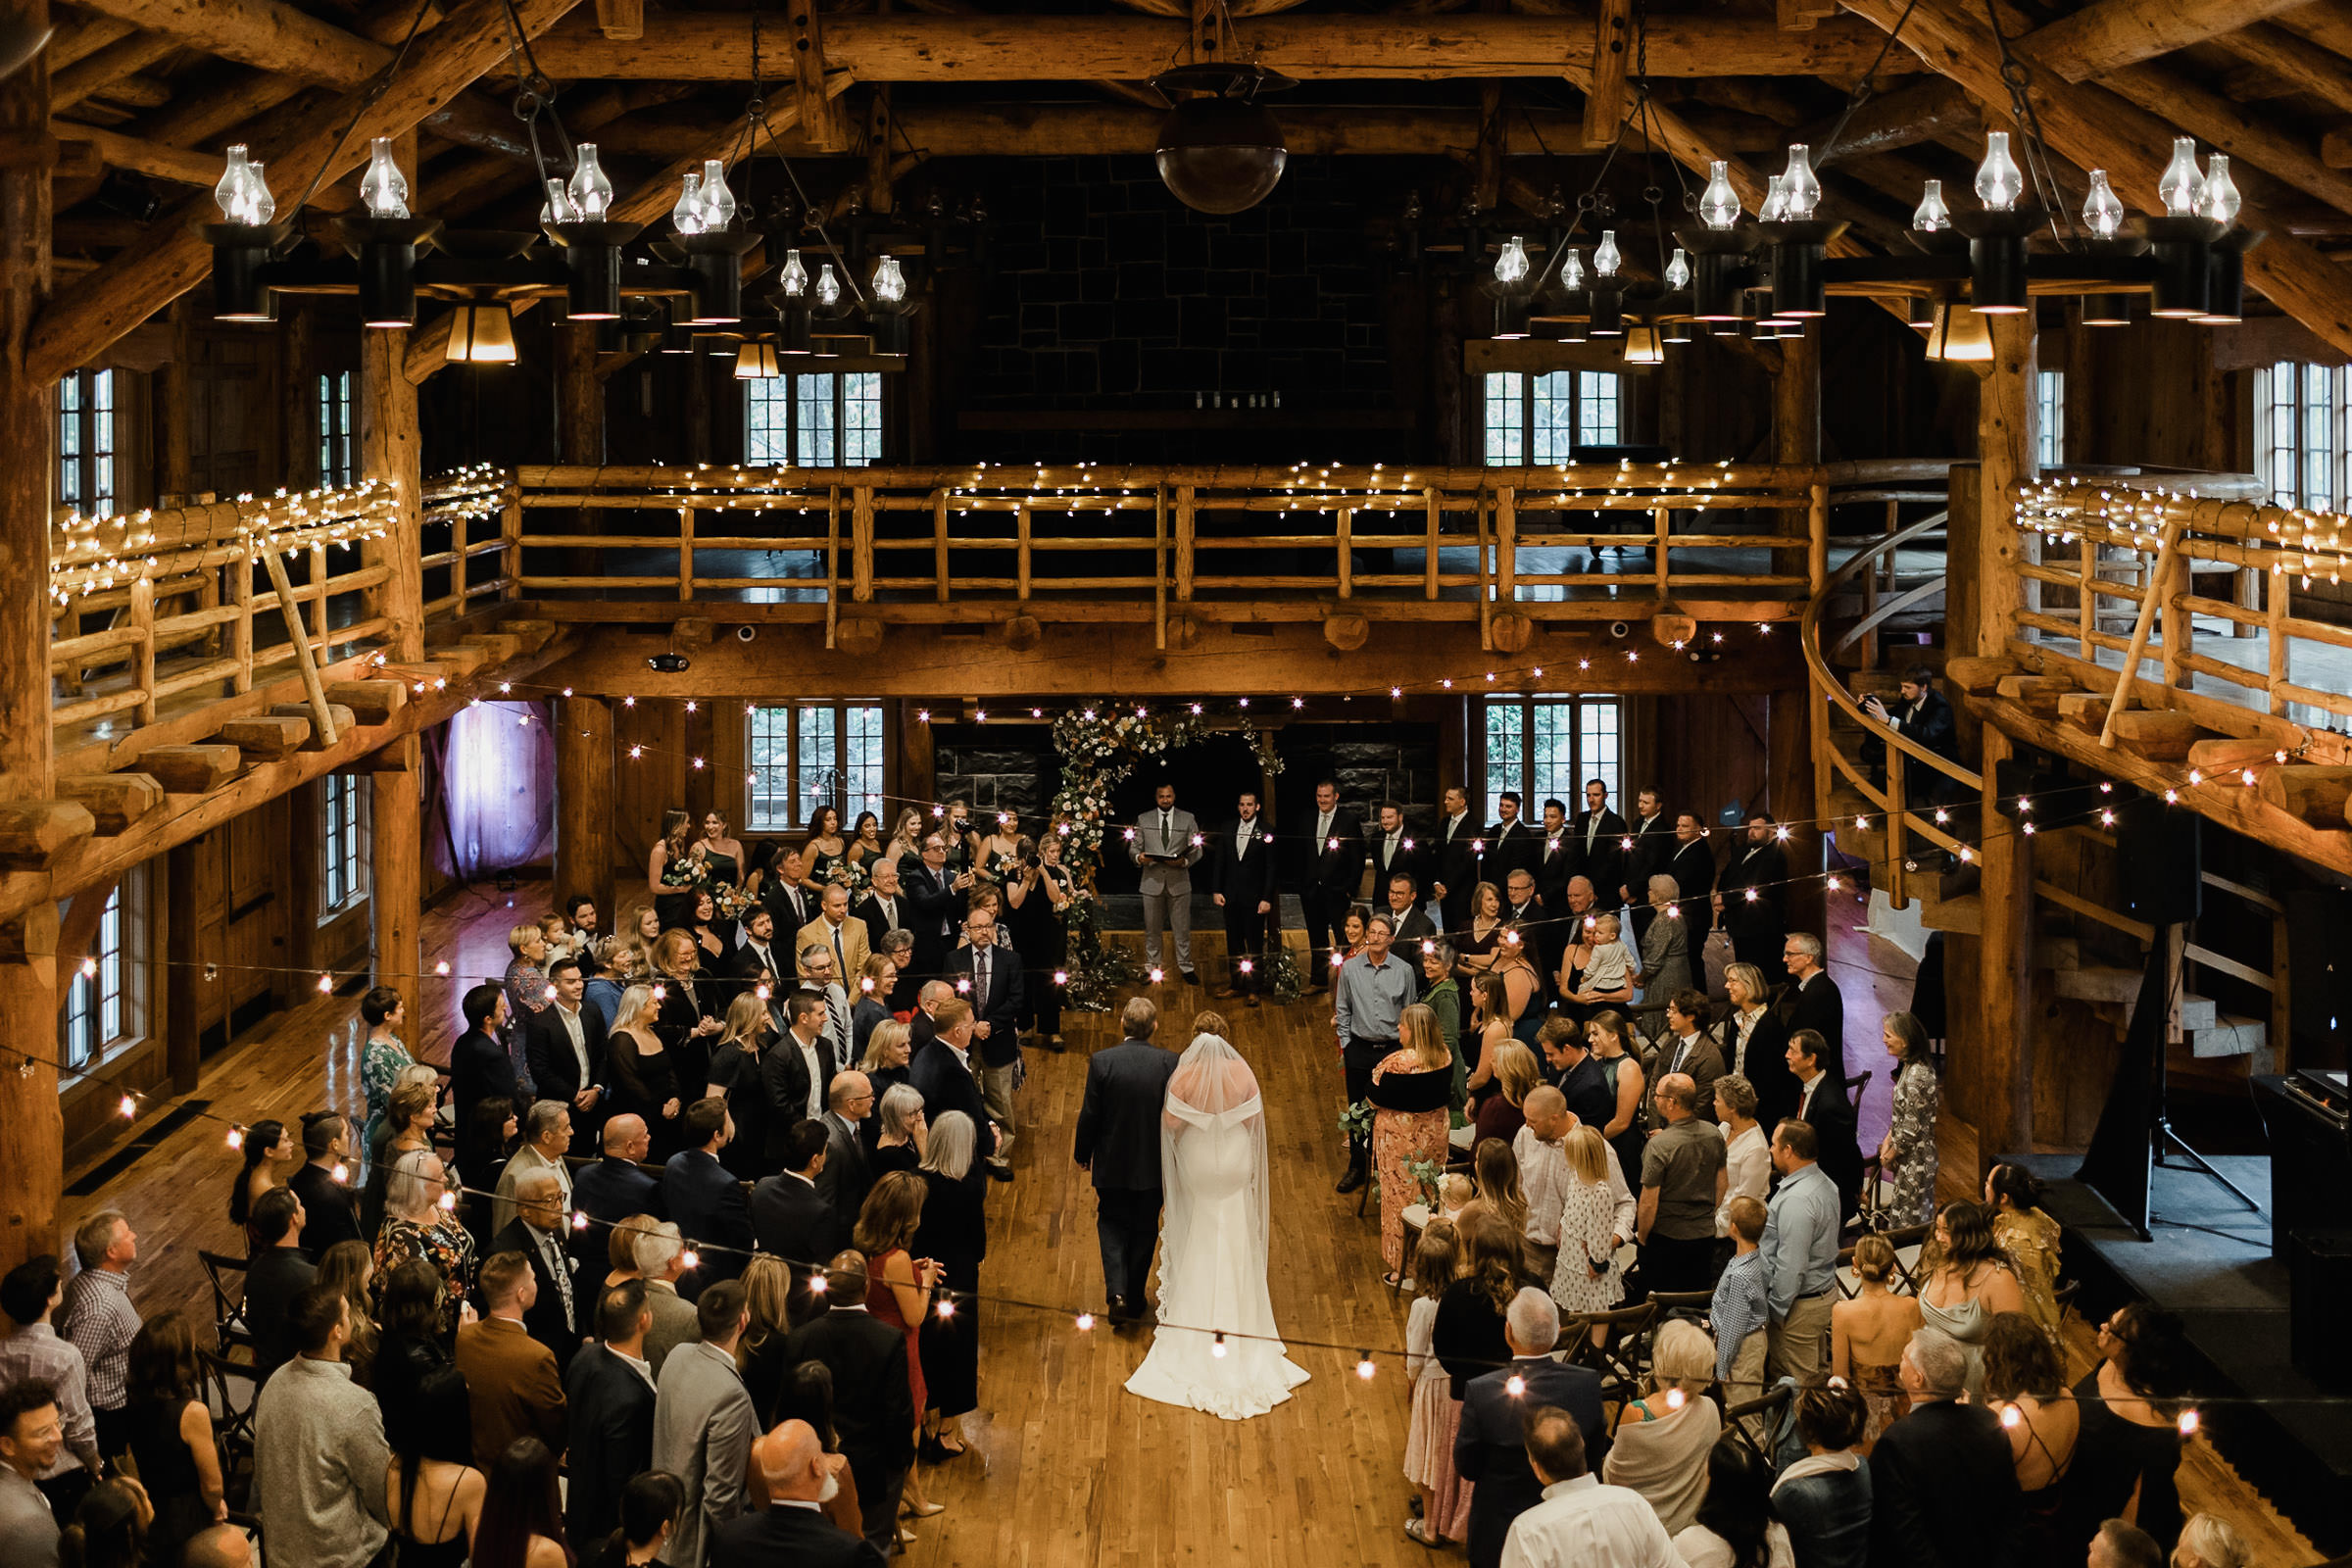 The bride and her father walk down the aisle during a wedding ceremony at Sunriver Resort's Great Hall